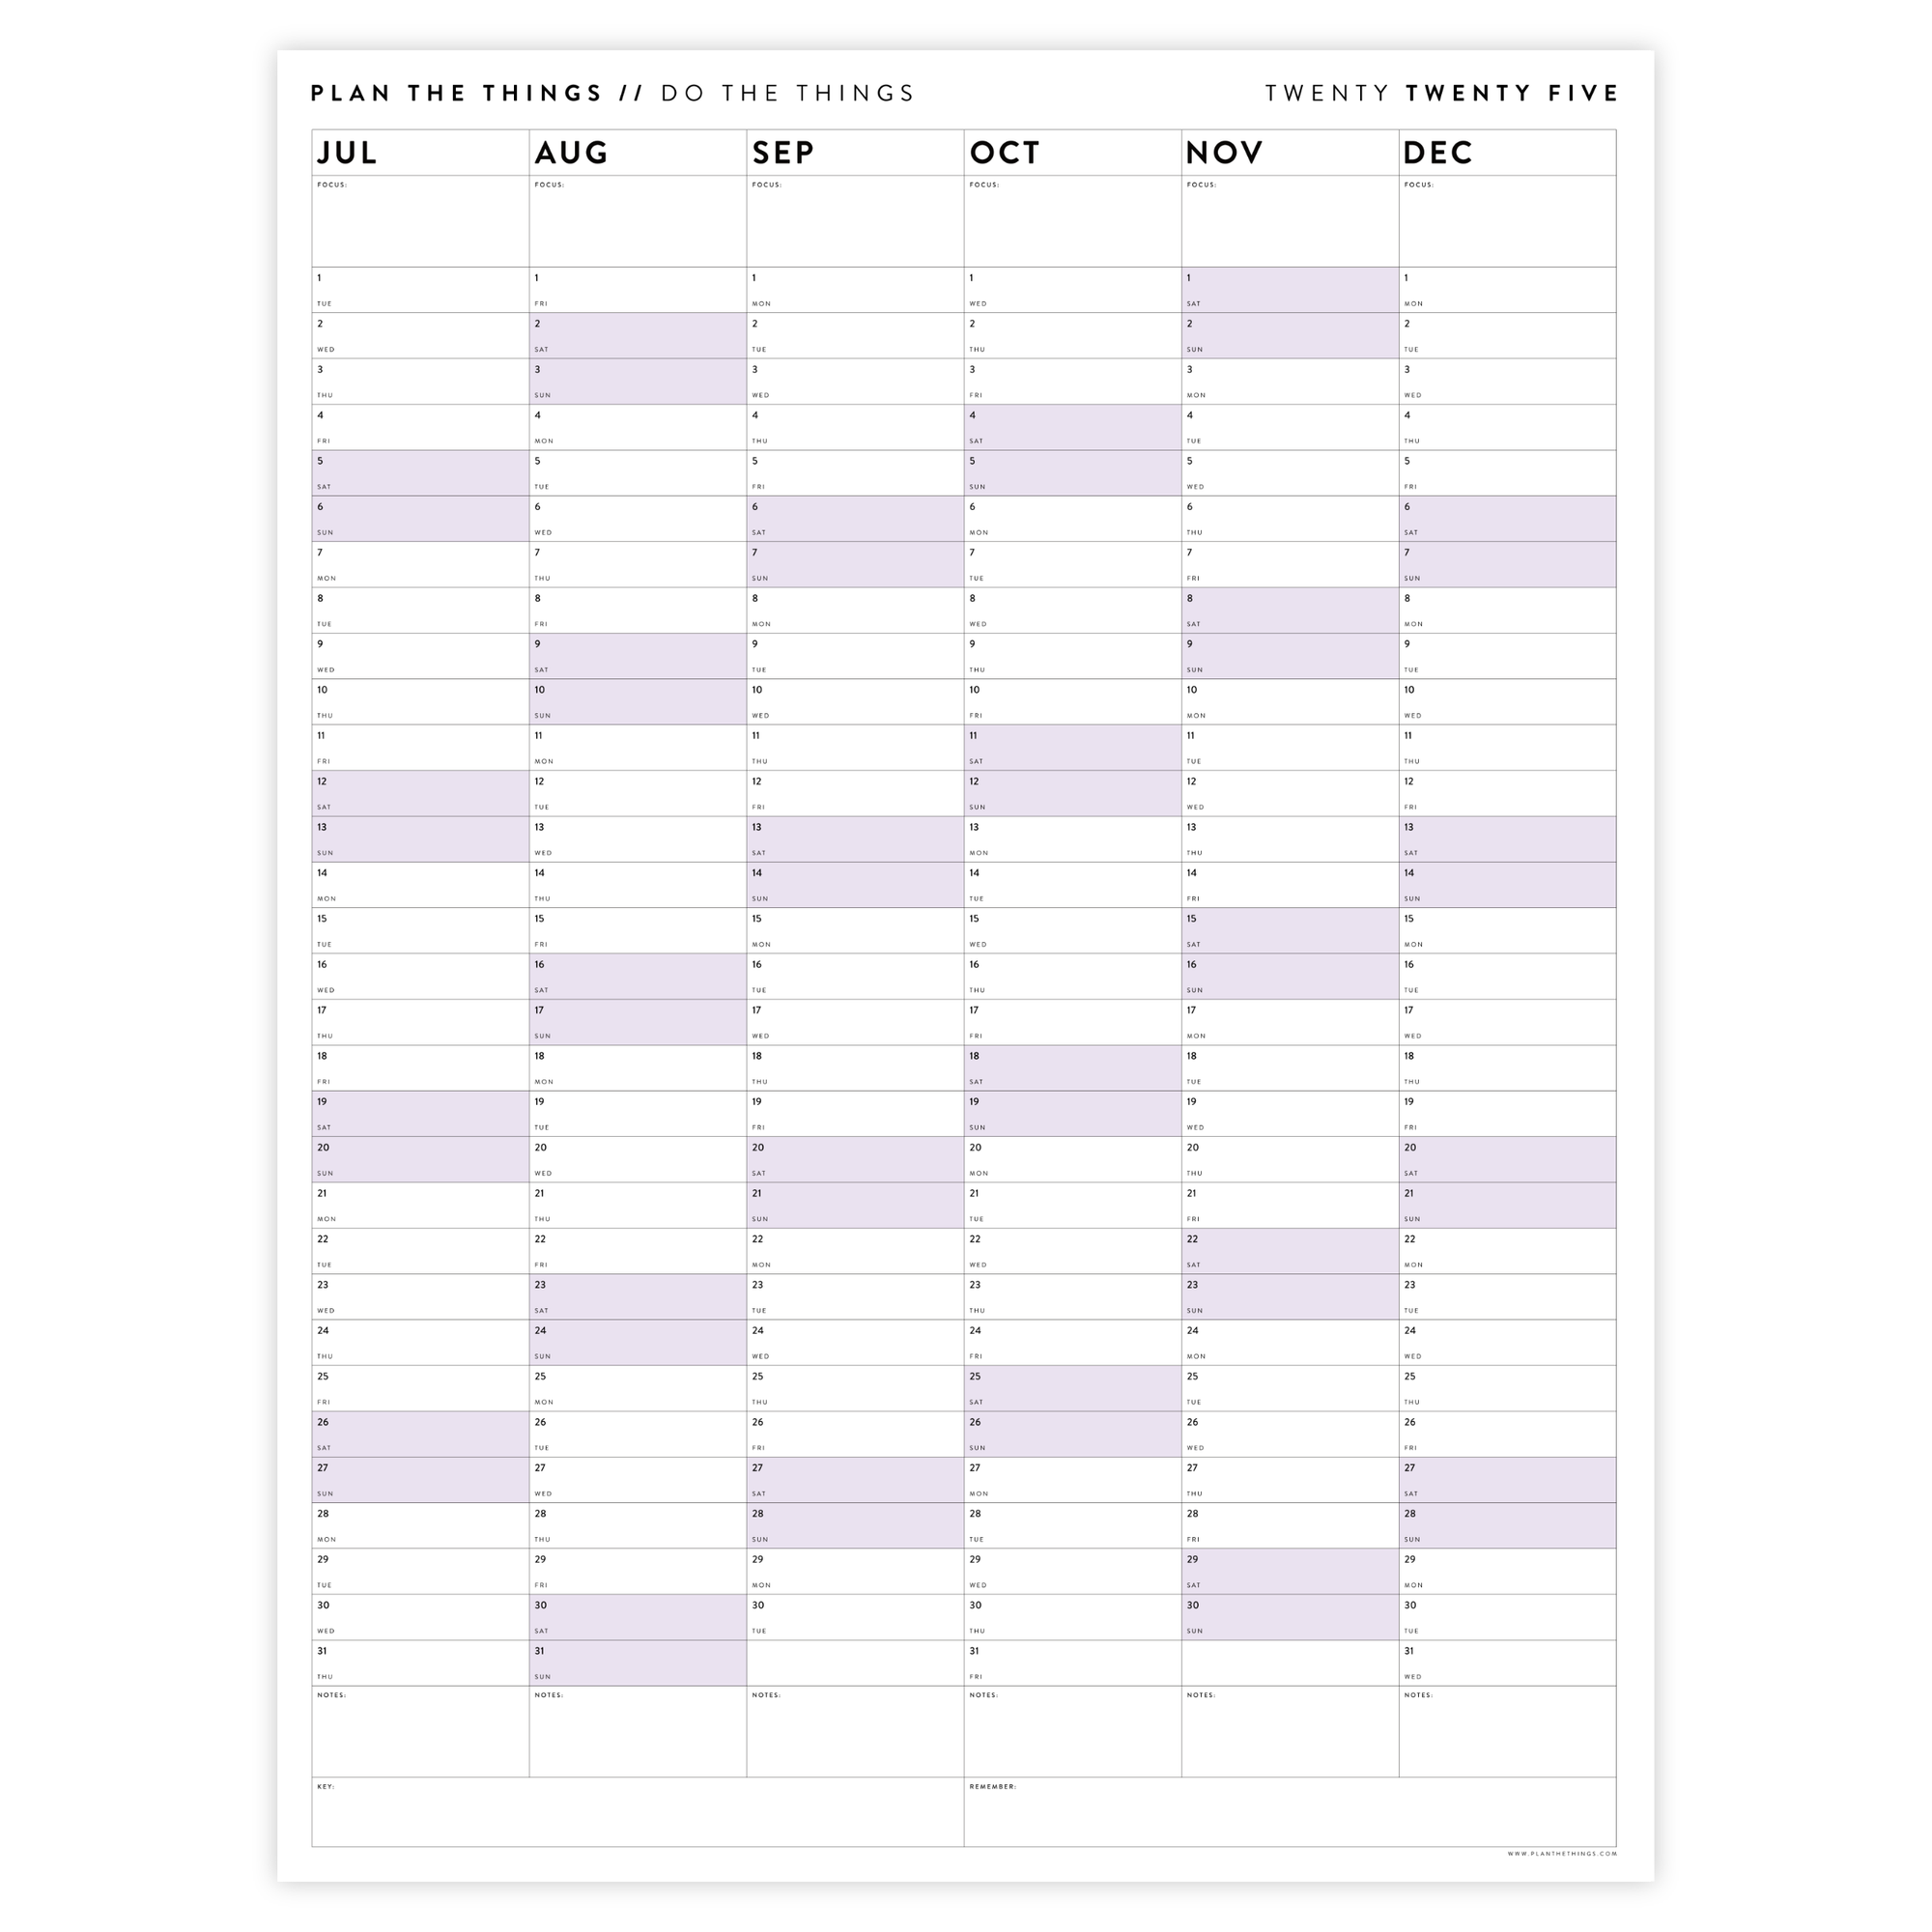 SIX MONTH 2025 GIANT WALL CALENDAR (JULY TO DECEMBER) WITH PURPLE WEEKENDS